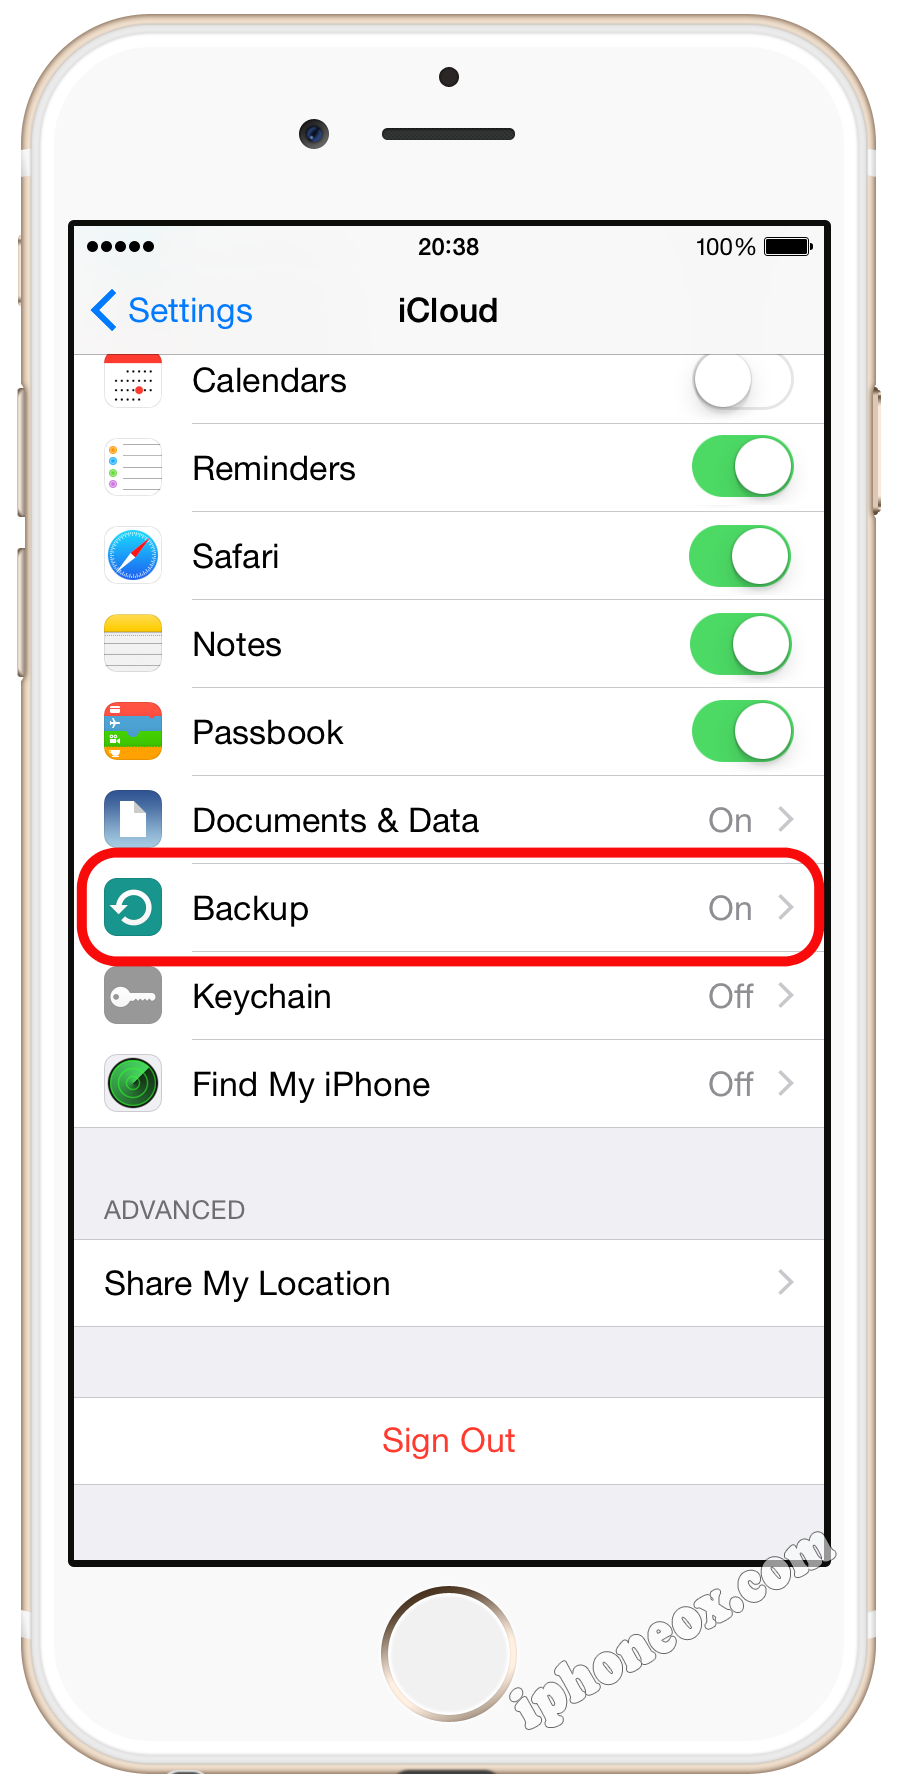 Tap Backup (Storage & Backup for iOS 7 or earlier)